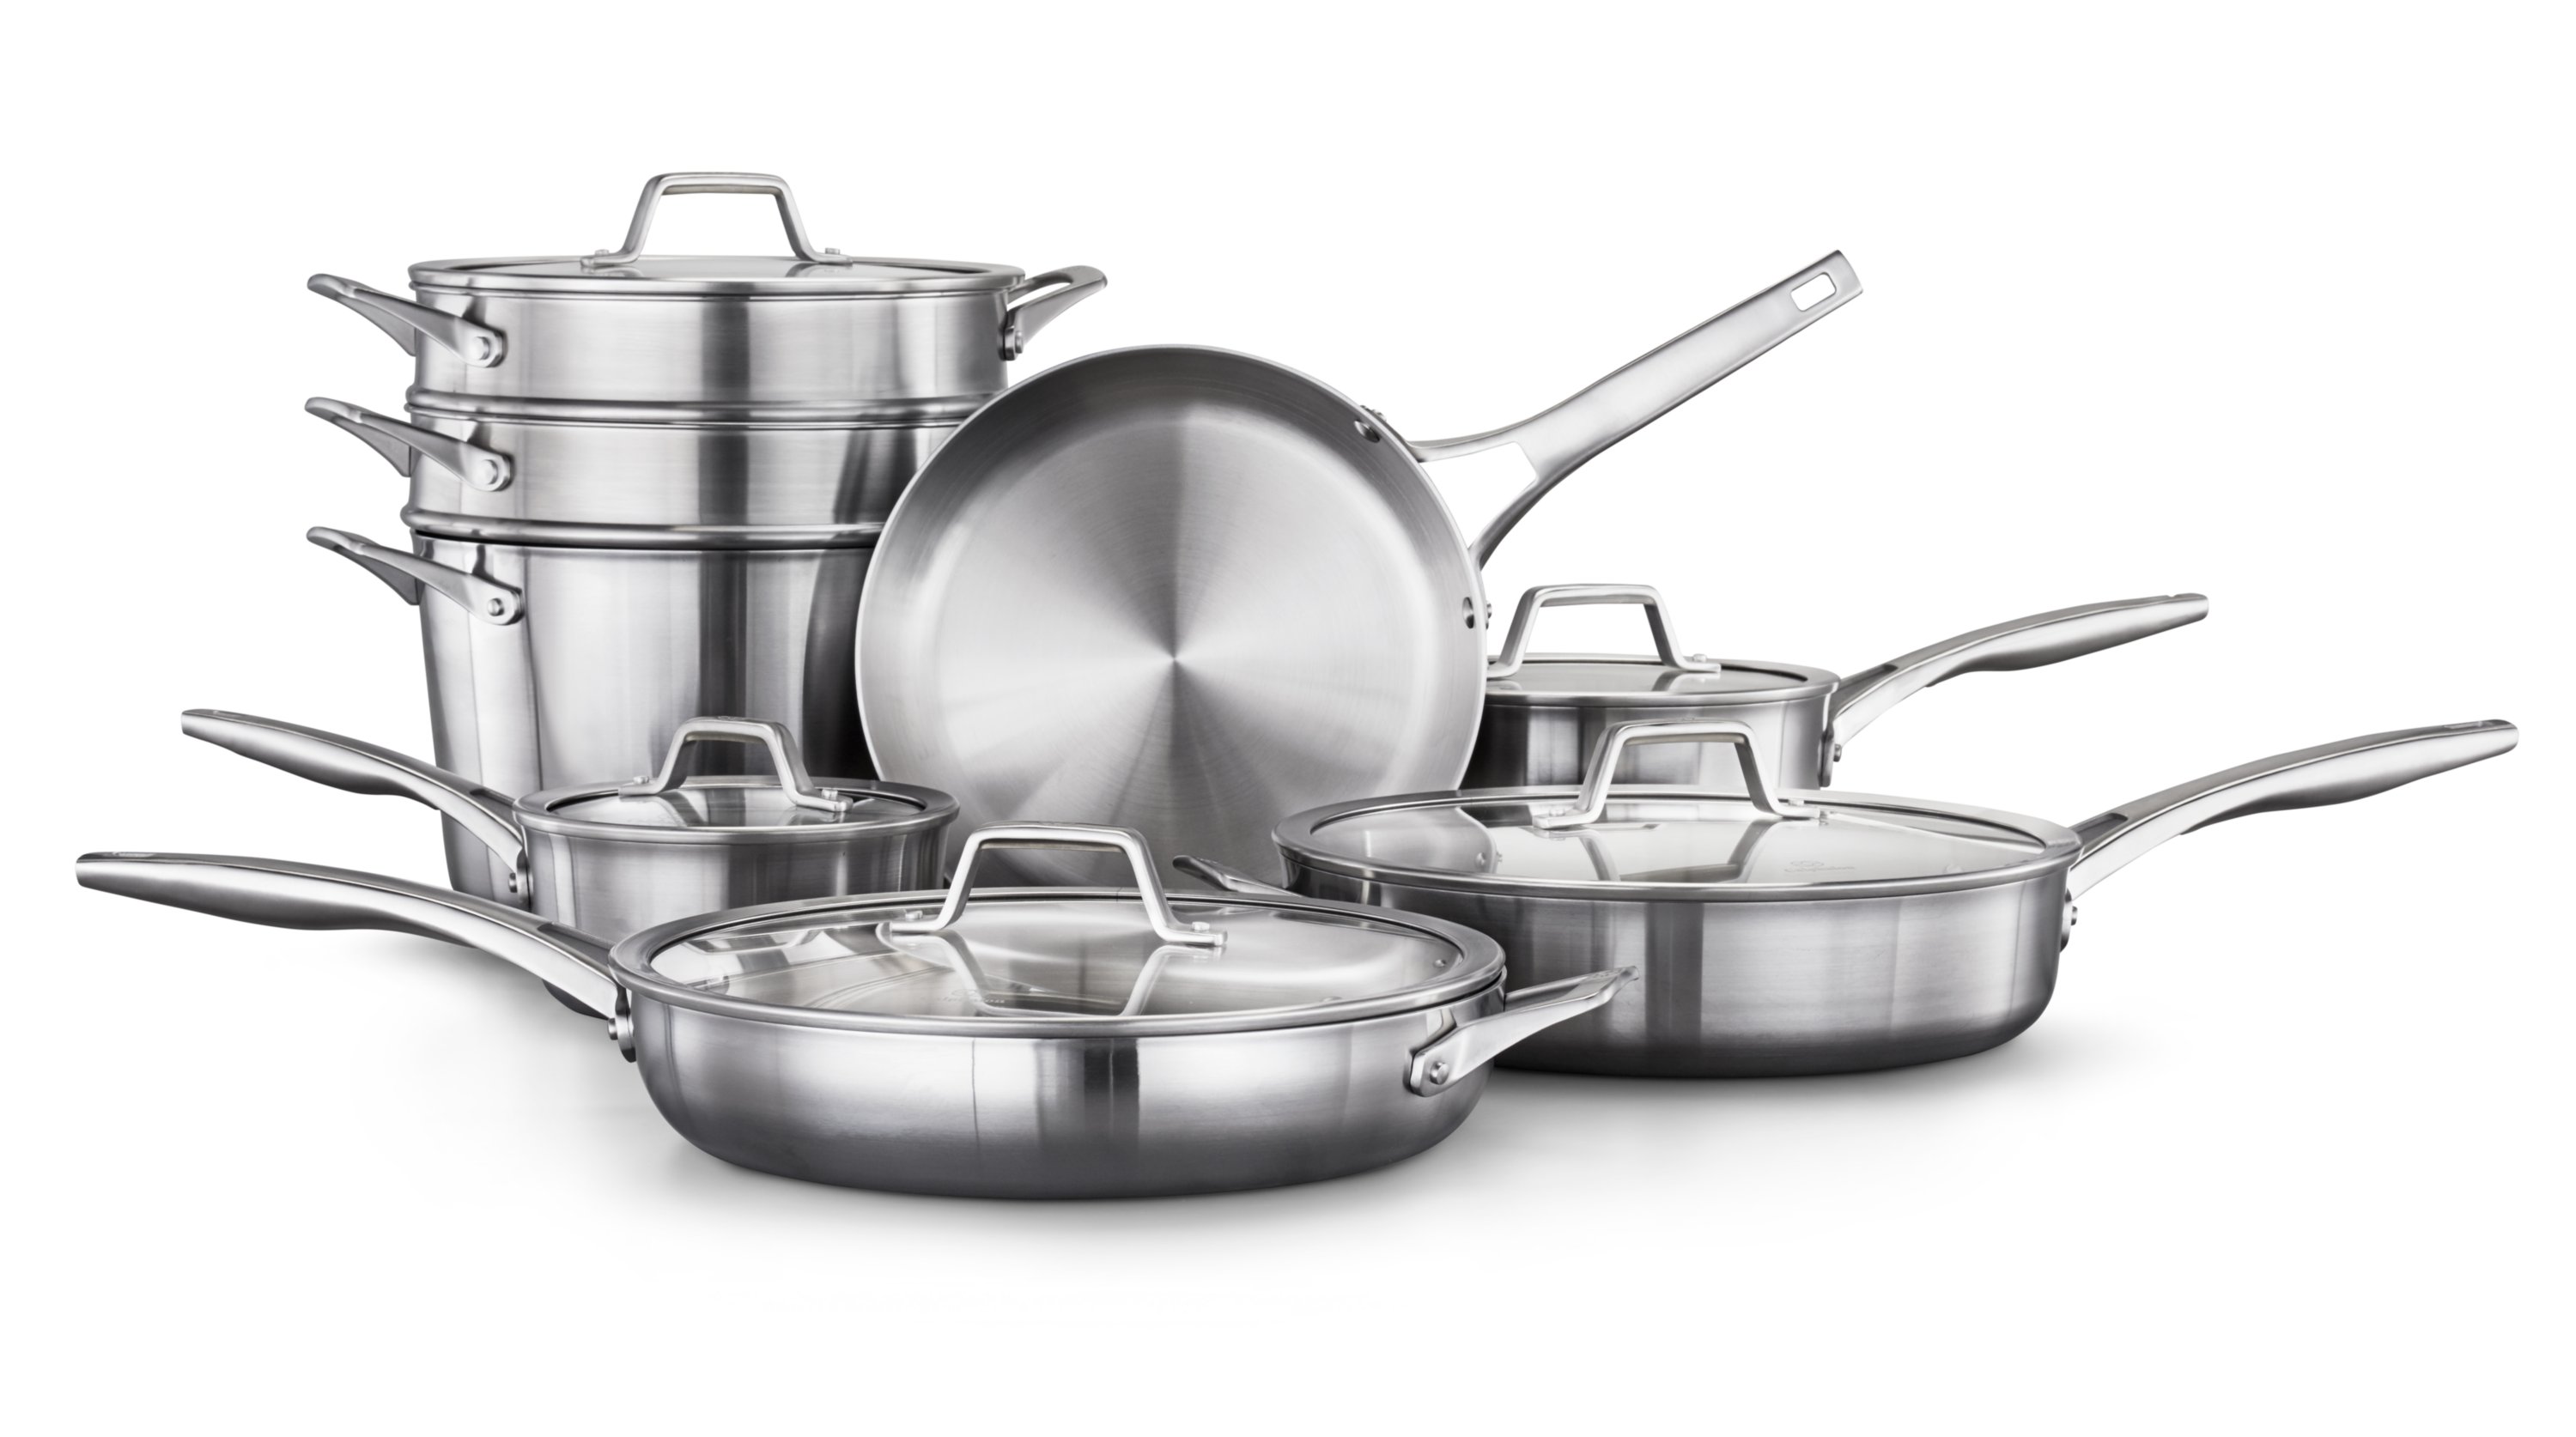 https://newellbrands.scene7.com/is/image//NewellRubbermaid/2052666-calphalon-premier-13pc-set-ss-without-food-straight-on